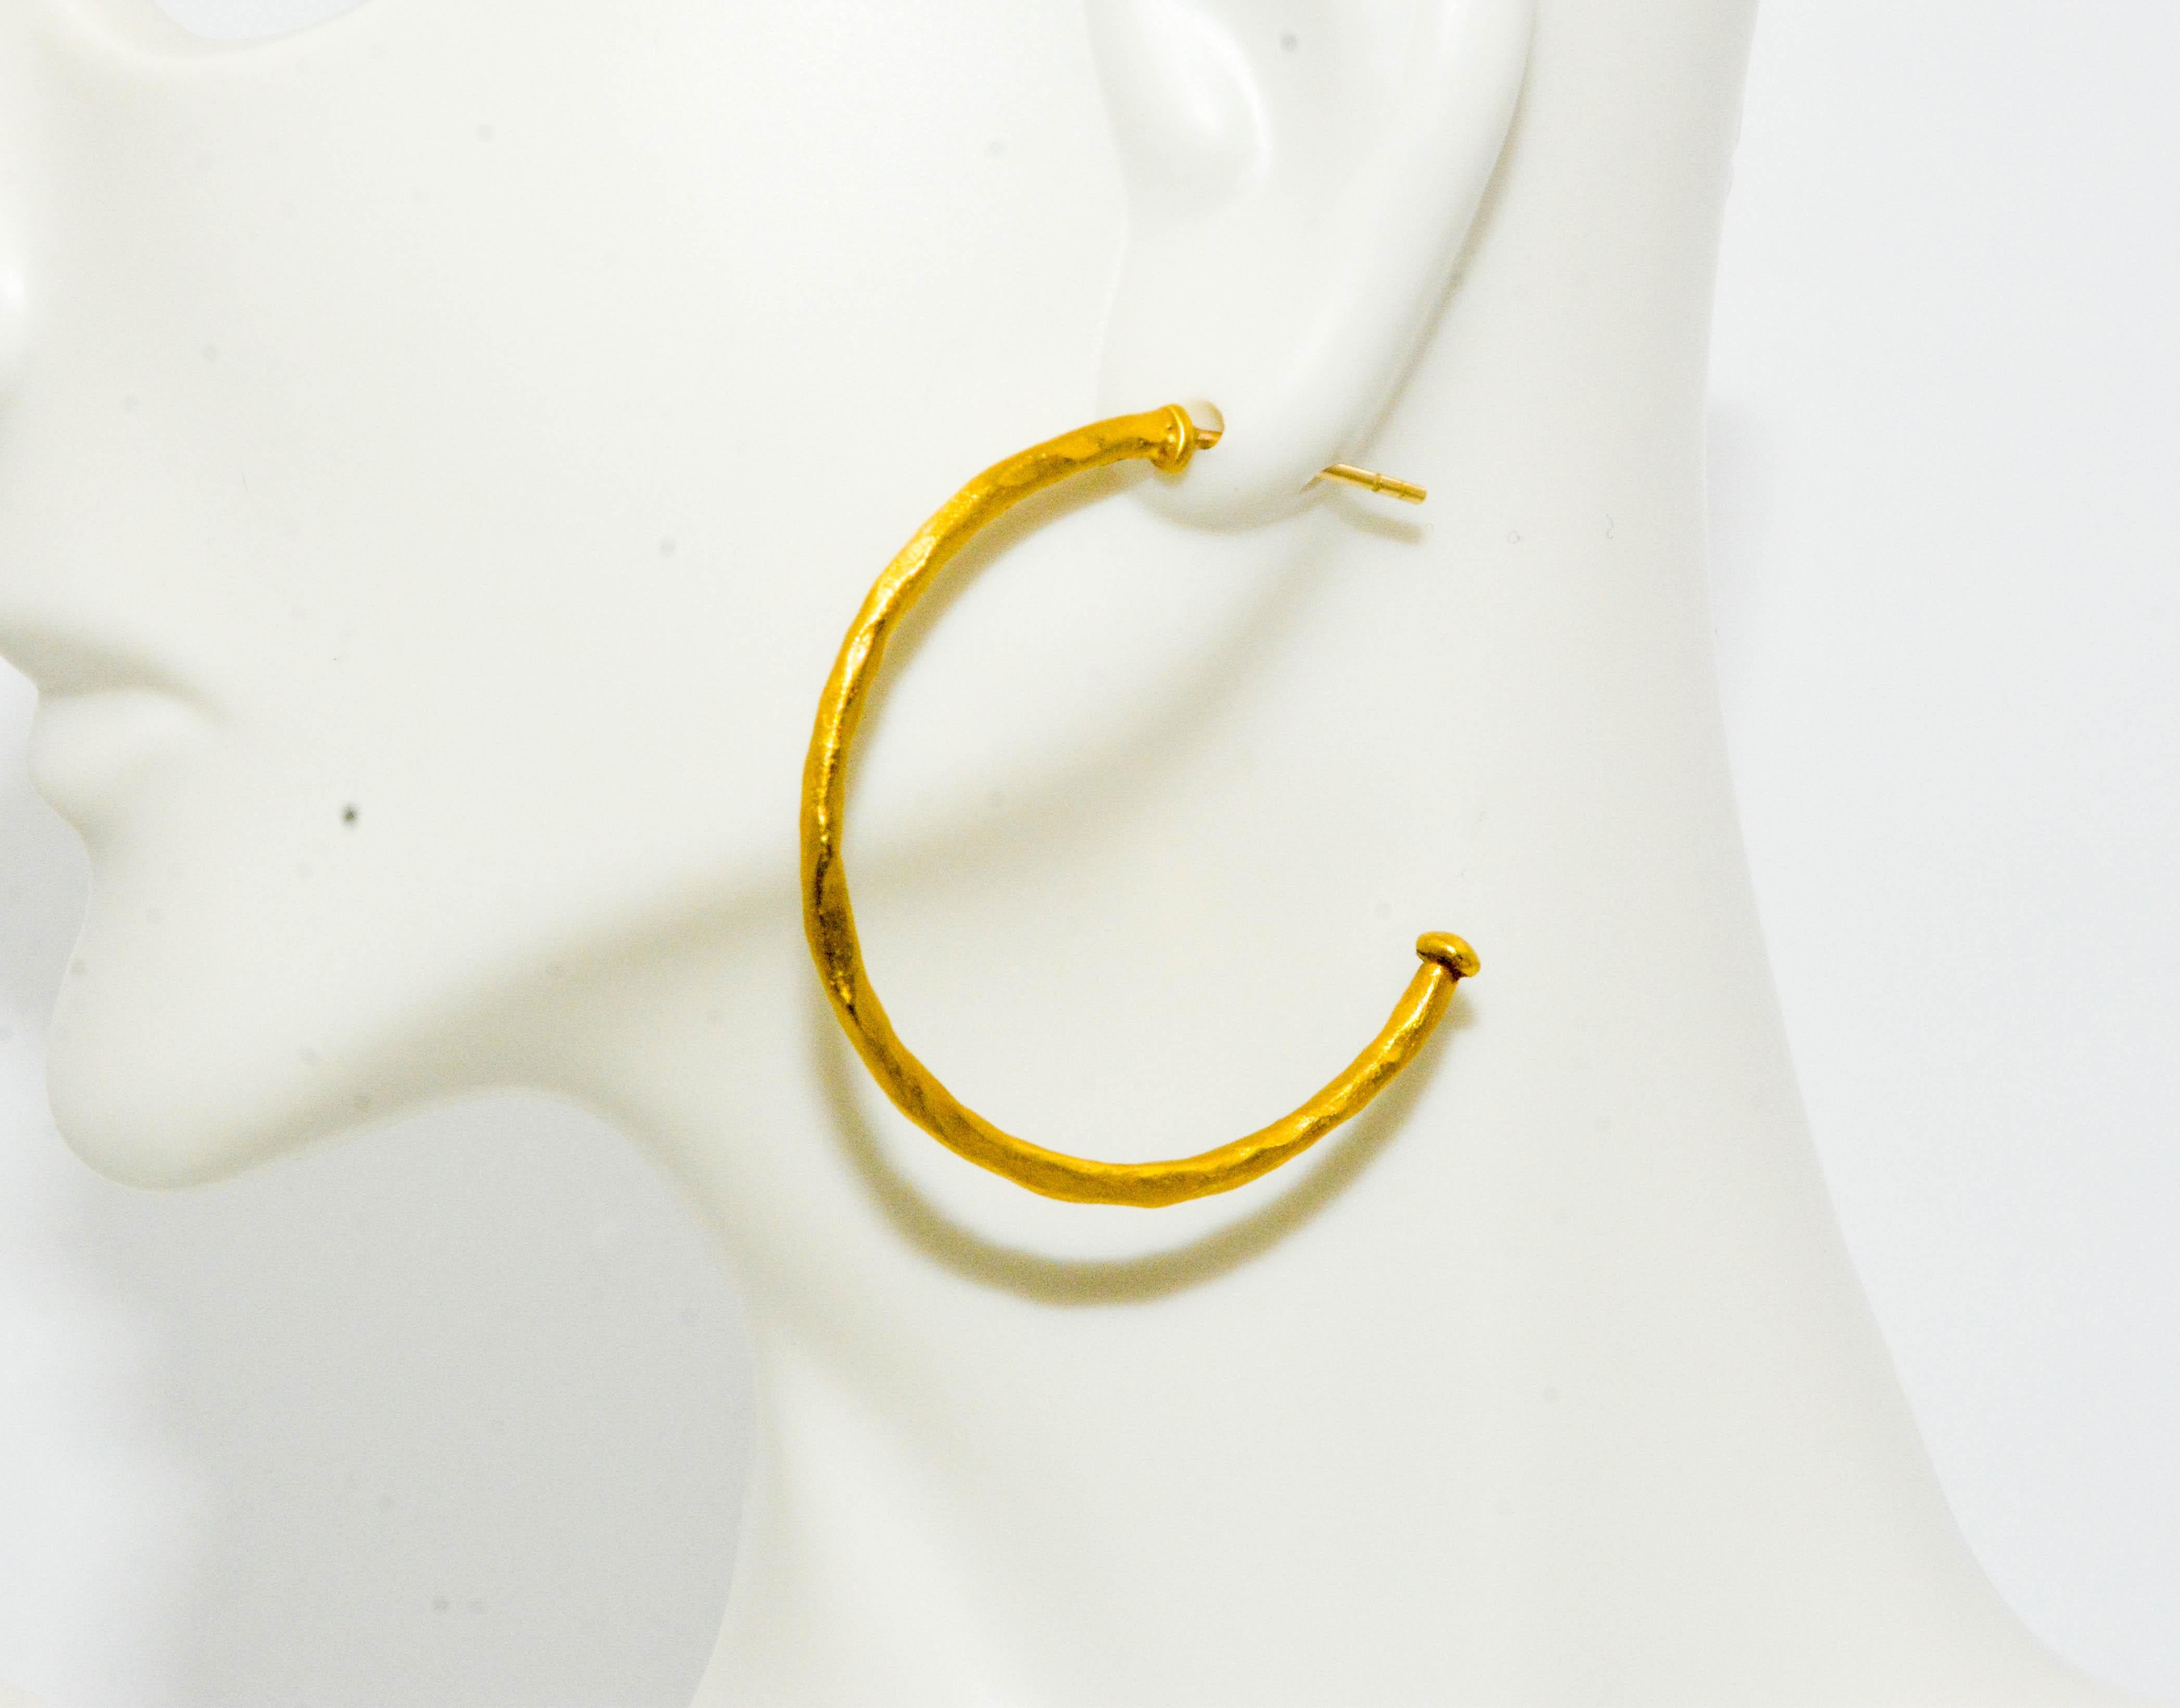 Designed with you in mind, these earrings blend style, terrific comfort and outstanding value. Designer Luka Behar 24 karat yellow gold large hoop earrings. Feather light and stylish in irresistible 24 karat gold!